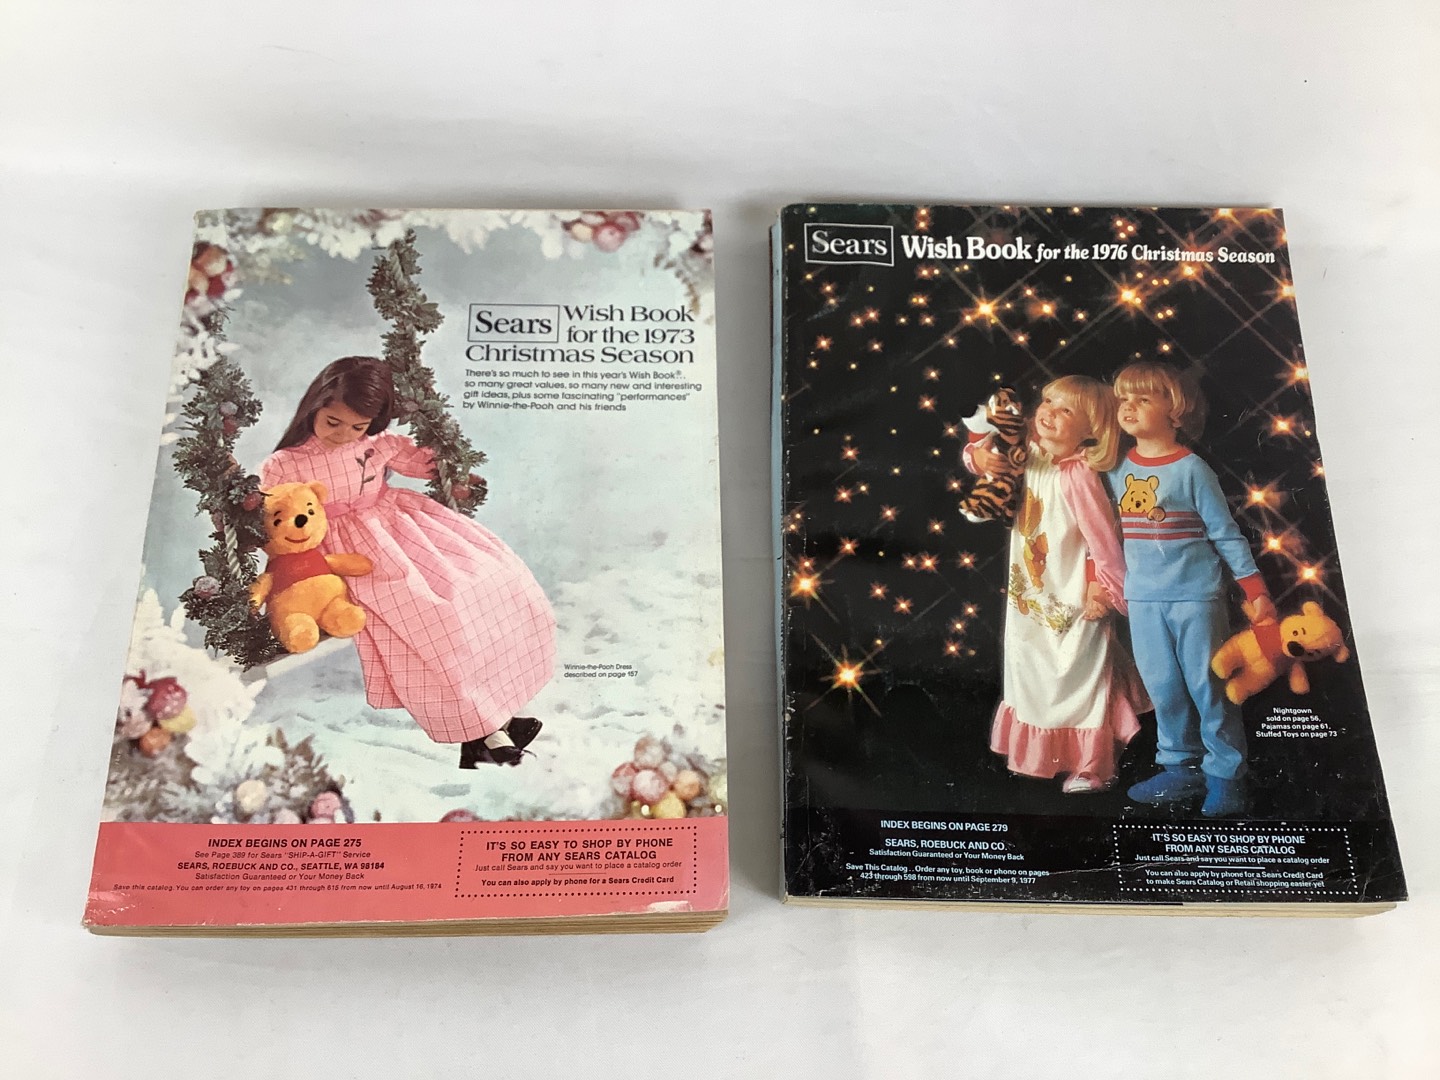 Get Inspired by Vintage Sears Christmas Catalogs